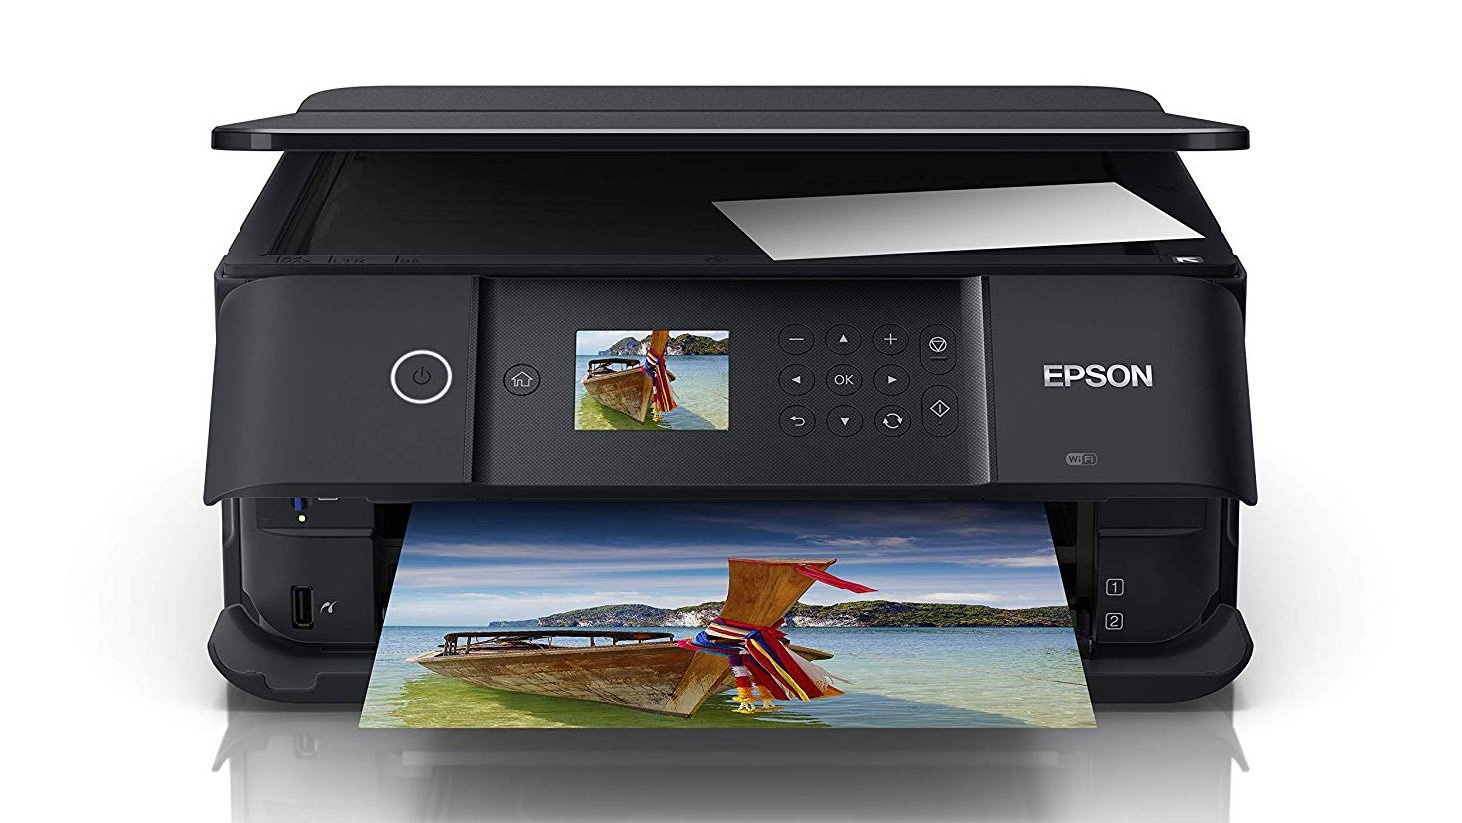 Brother HL-L3230CDW color laser printer (A4, 2400x600dpi, up to 18 pages /  min., Duplex, USB, network, WLAN)